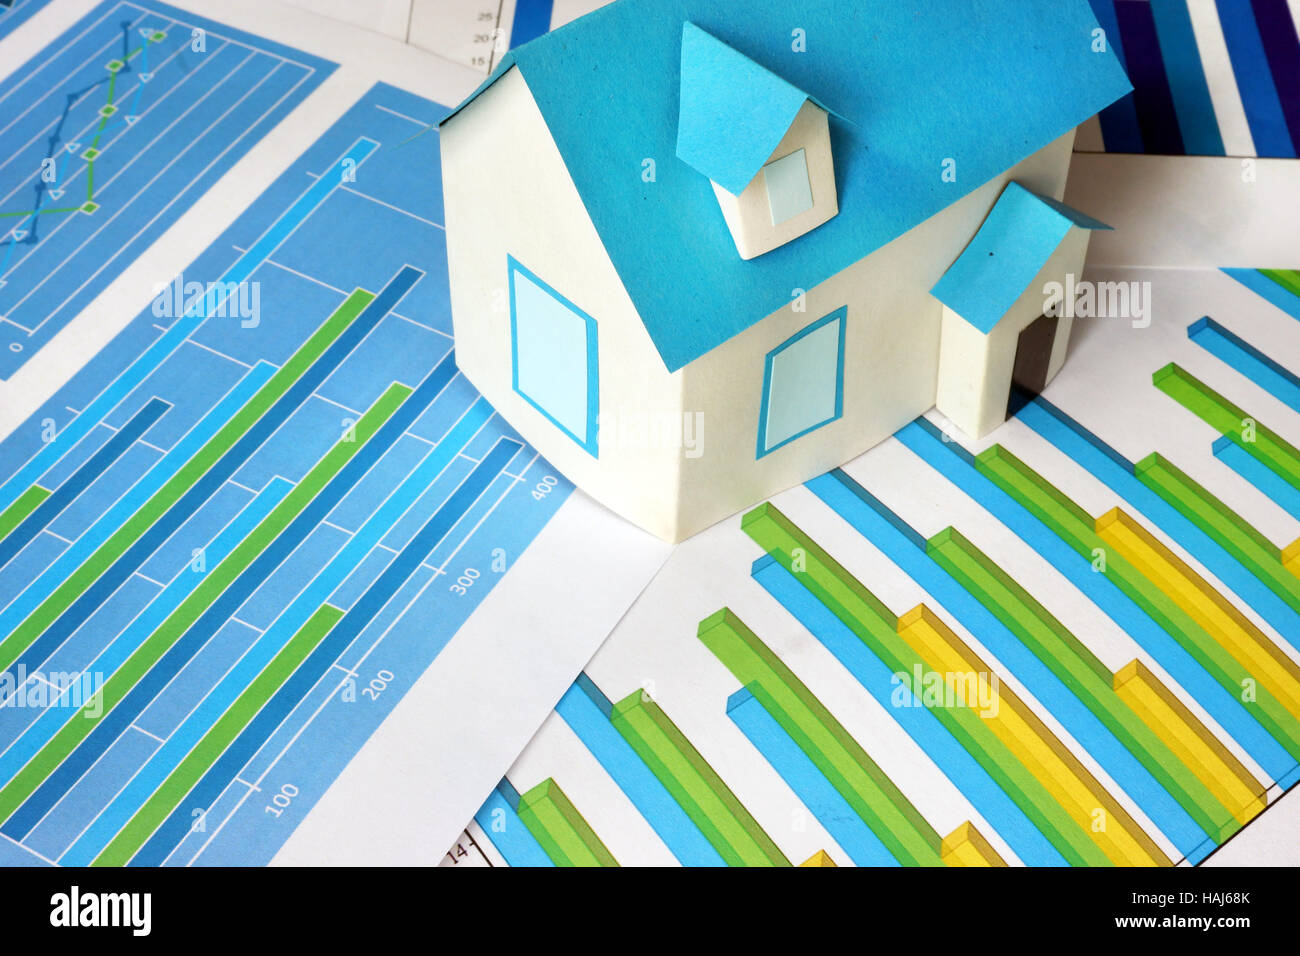 Charts and model of house. Real estate  concept. Stock Photo